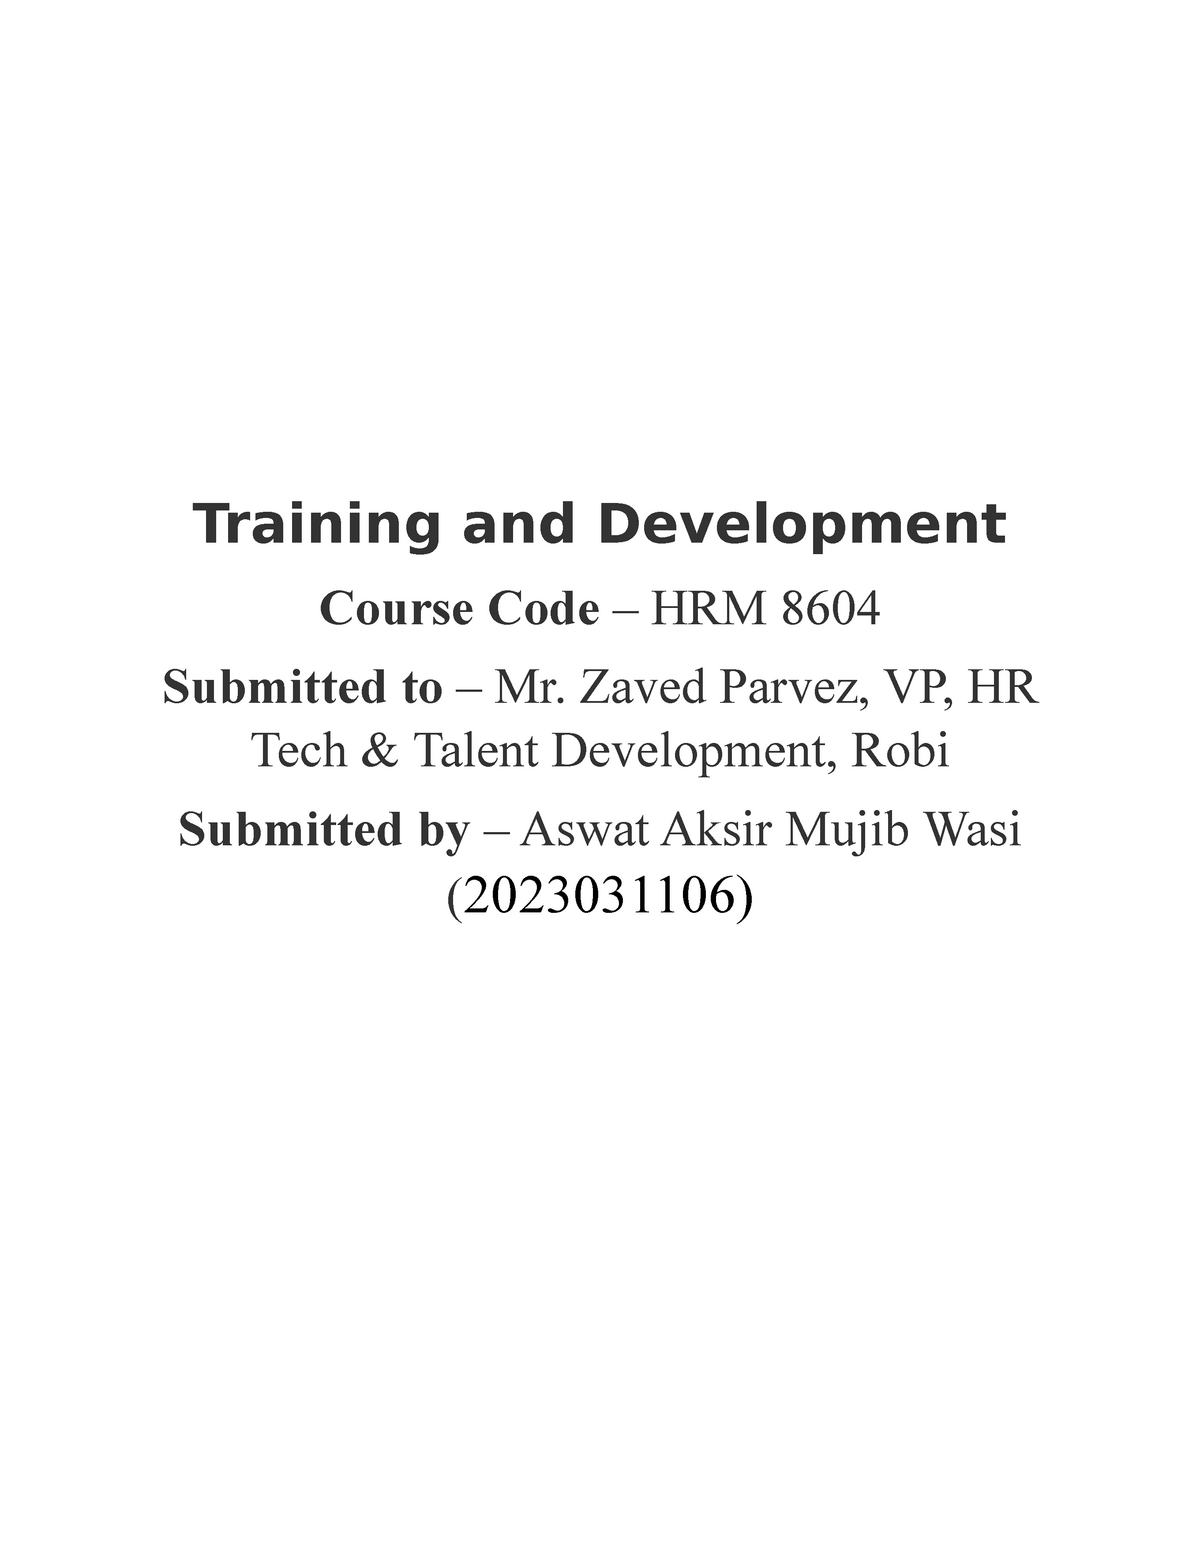 case study on training and development in india